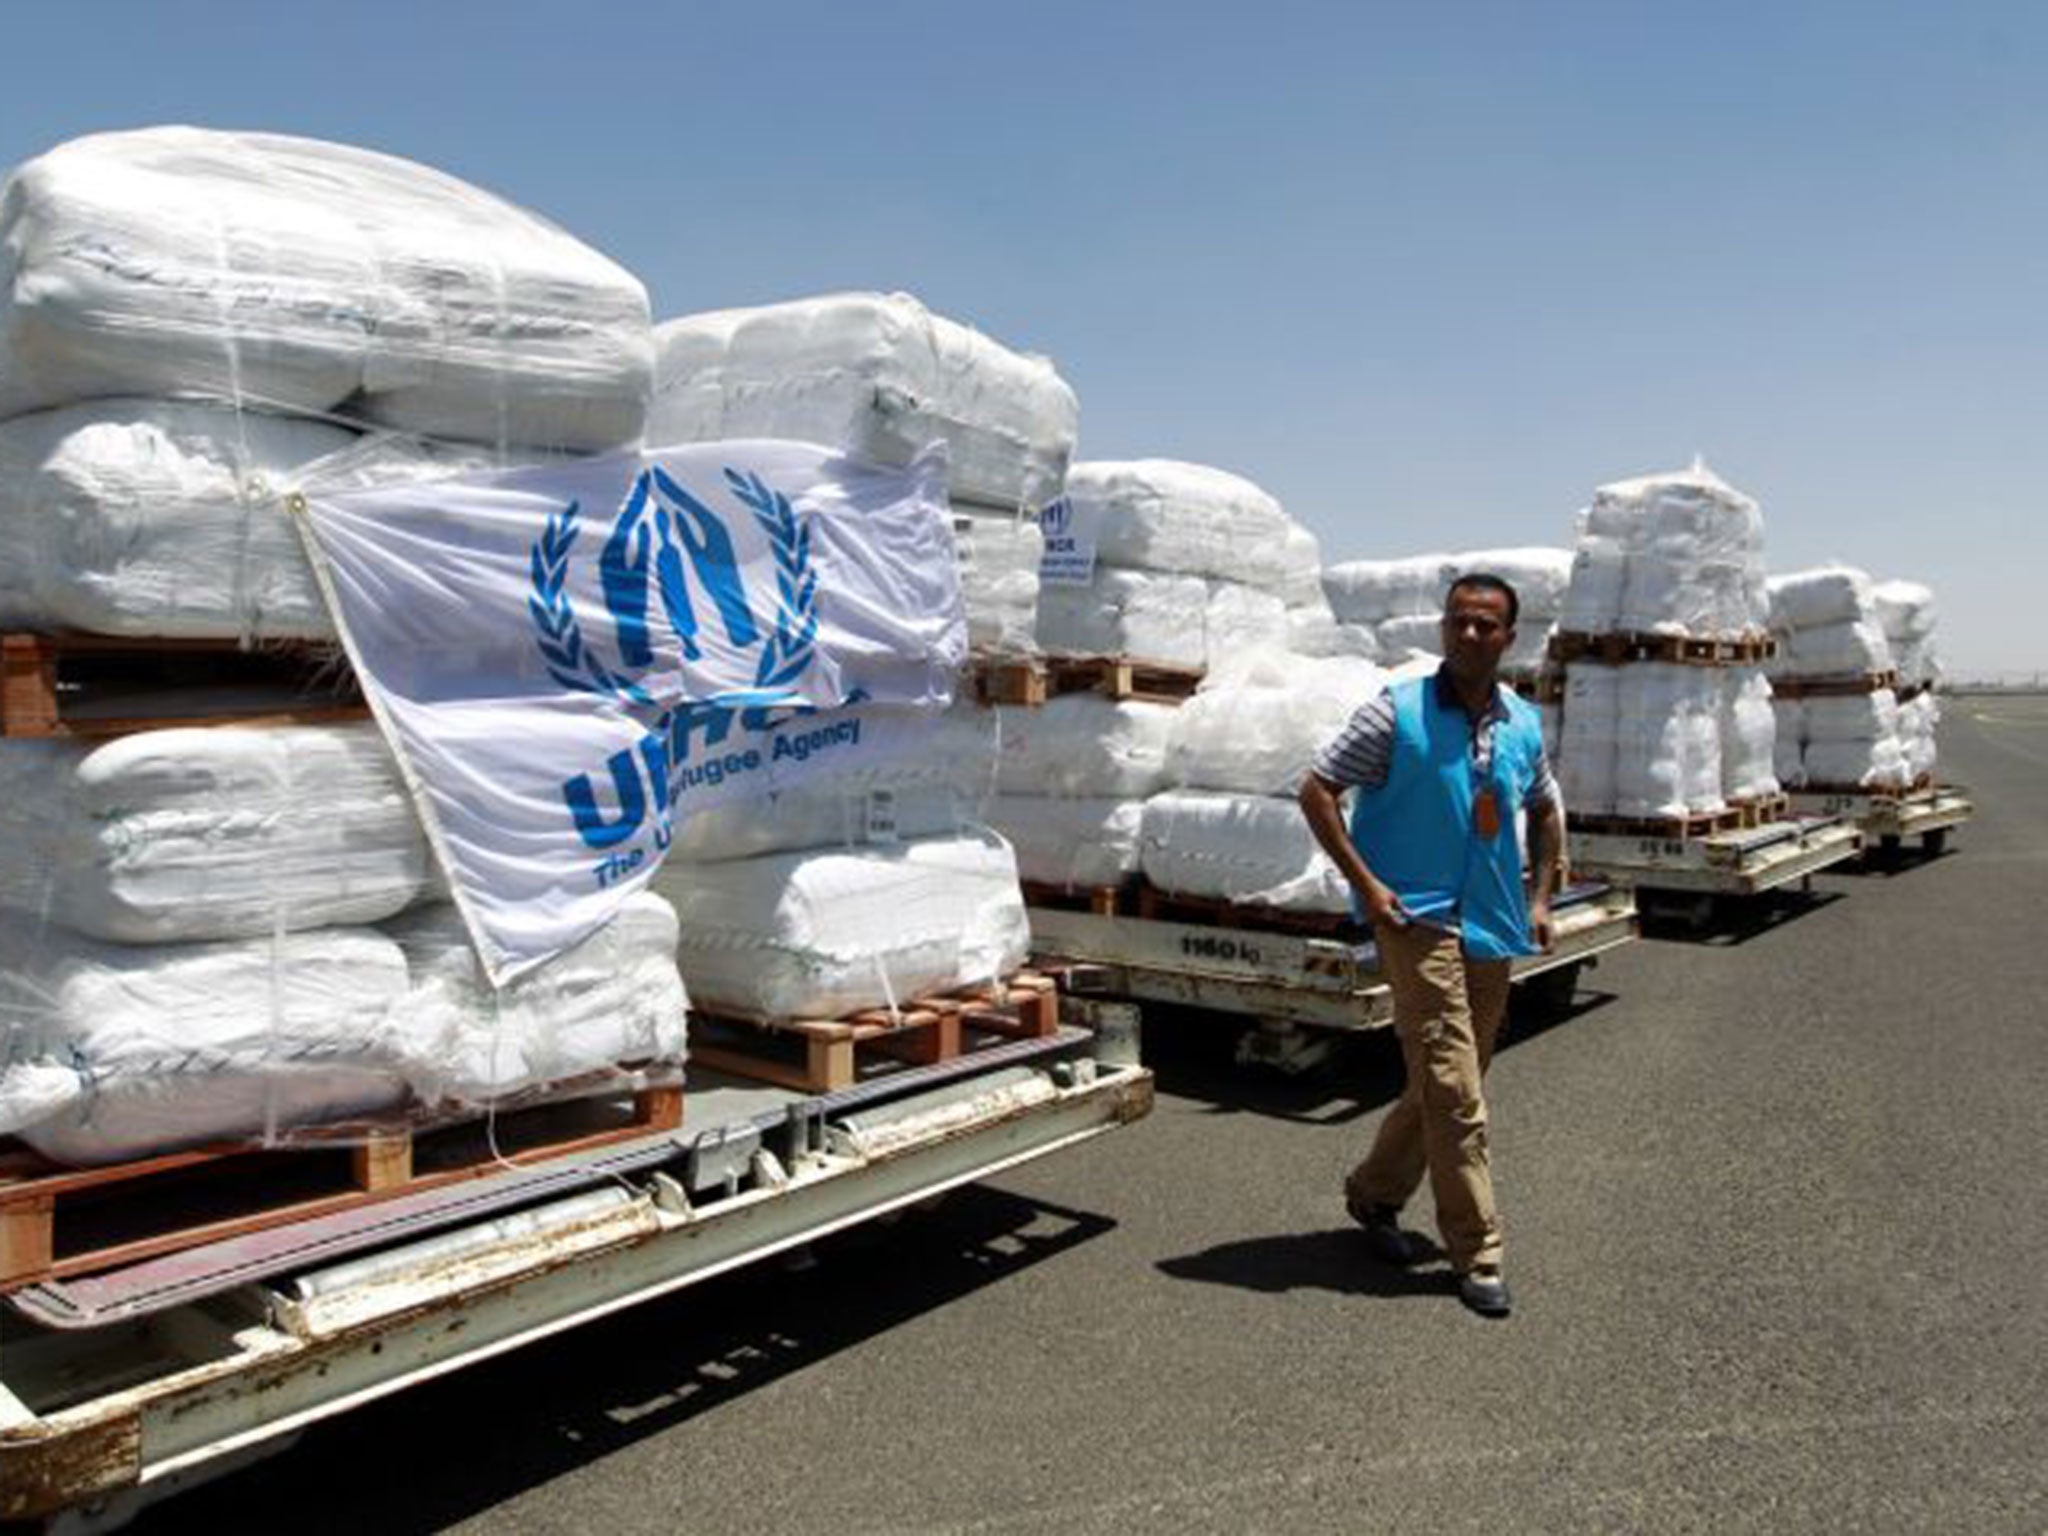 Emergency medical aid provided by United Nations High Commissioner for Refugees (UNHCR) is unloaded at the international airport in Sanaa